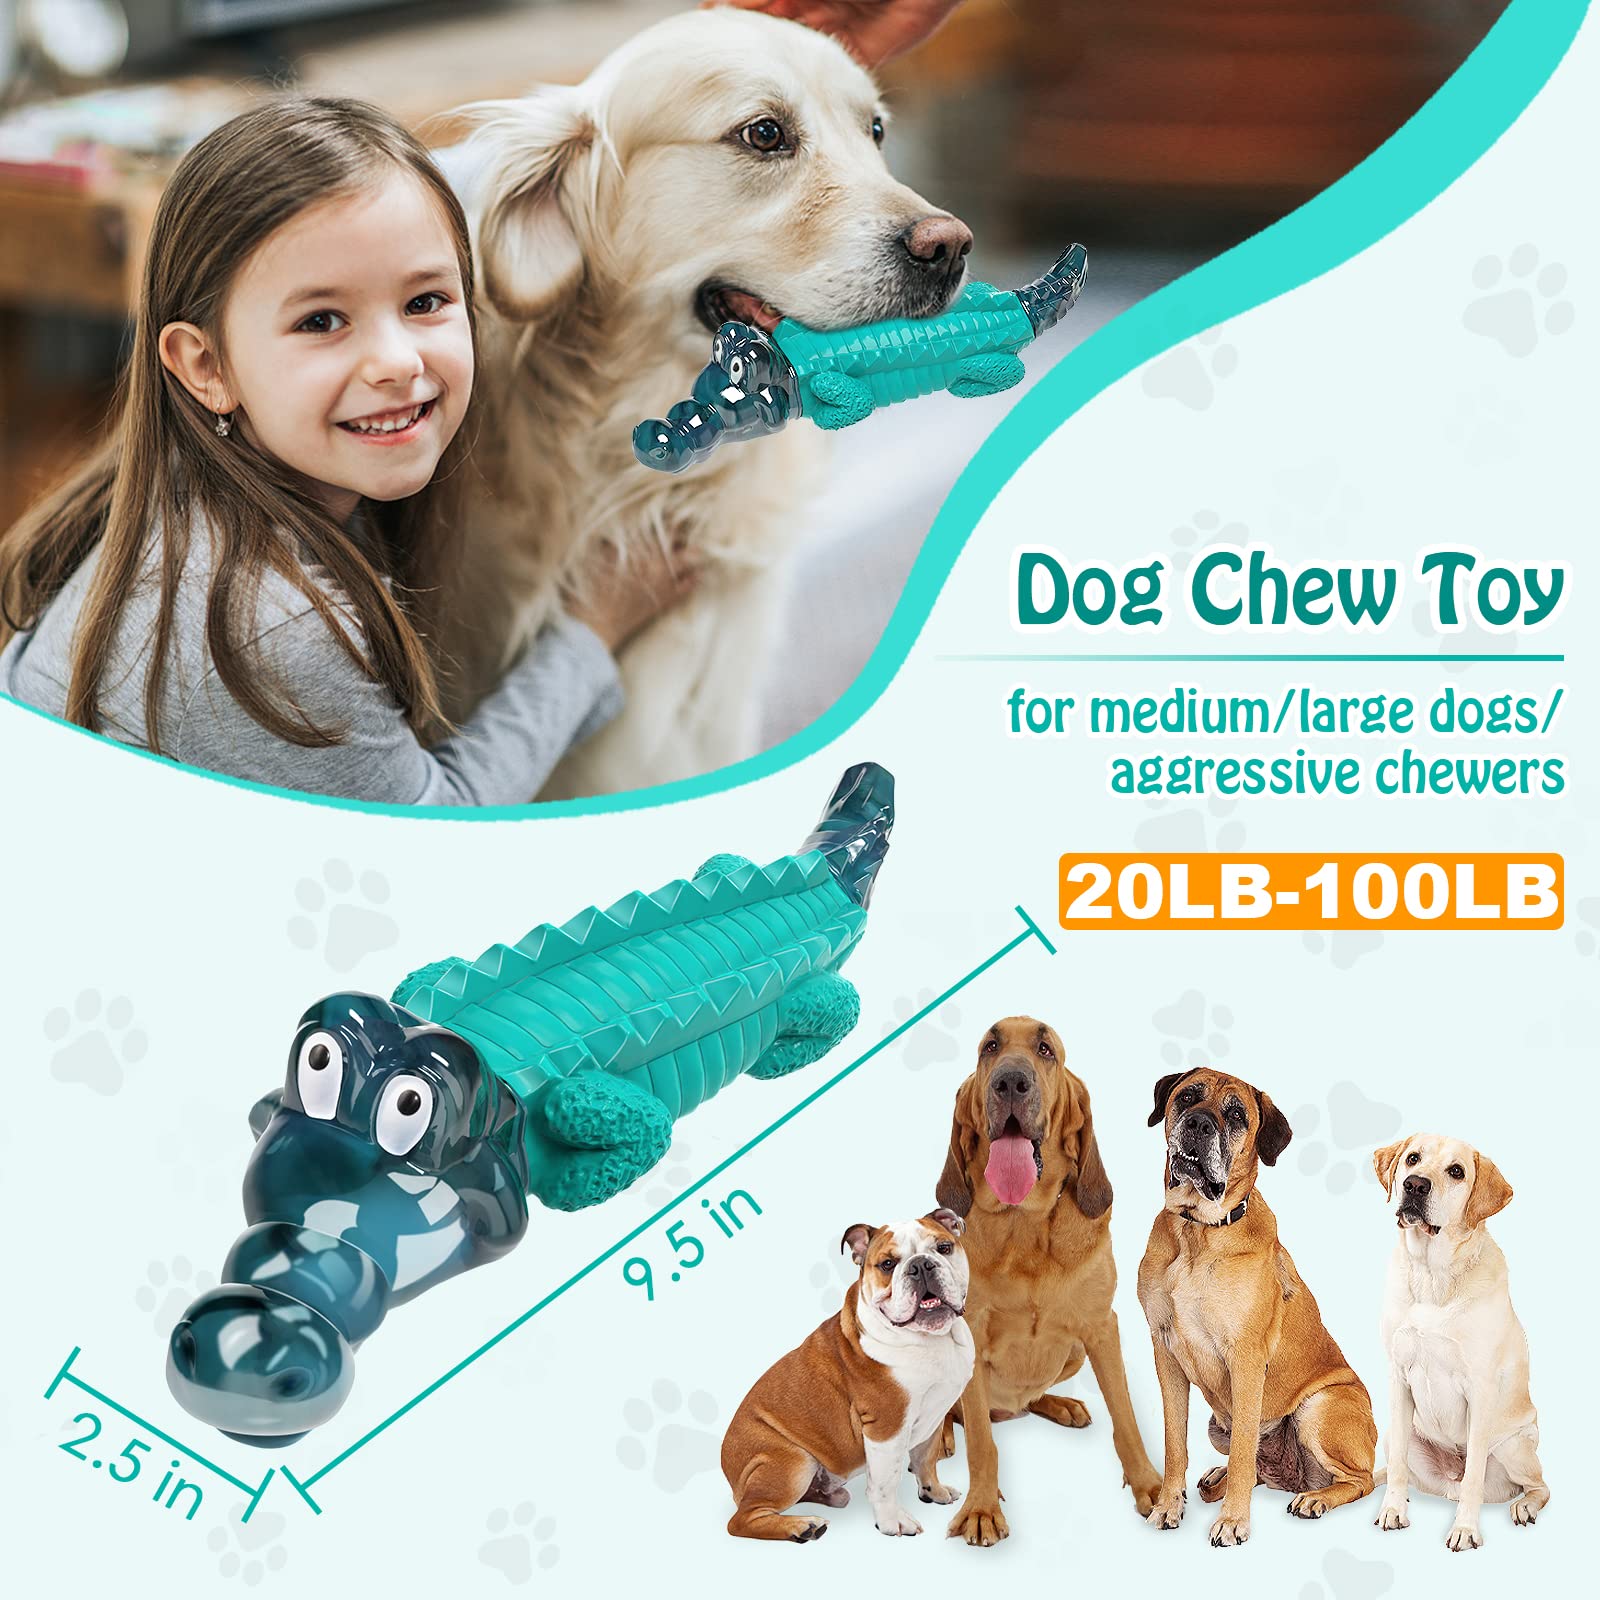 Jeefome Dog Toys for Super Aggresive Chewers/Tough Dog Toys/Heavy Duty/Indestructible Toys for Large/Medium Dogs to Keep Them Busy